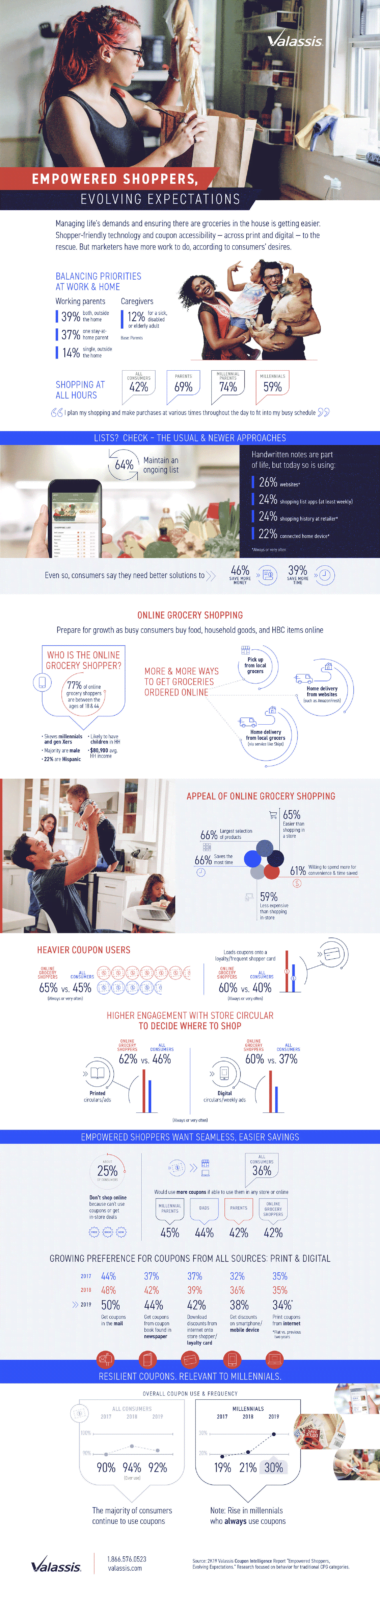 empowered-shoppers-infographic